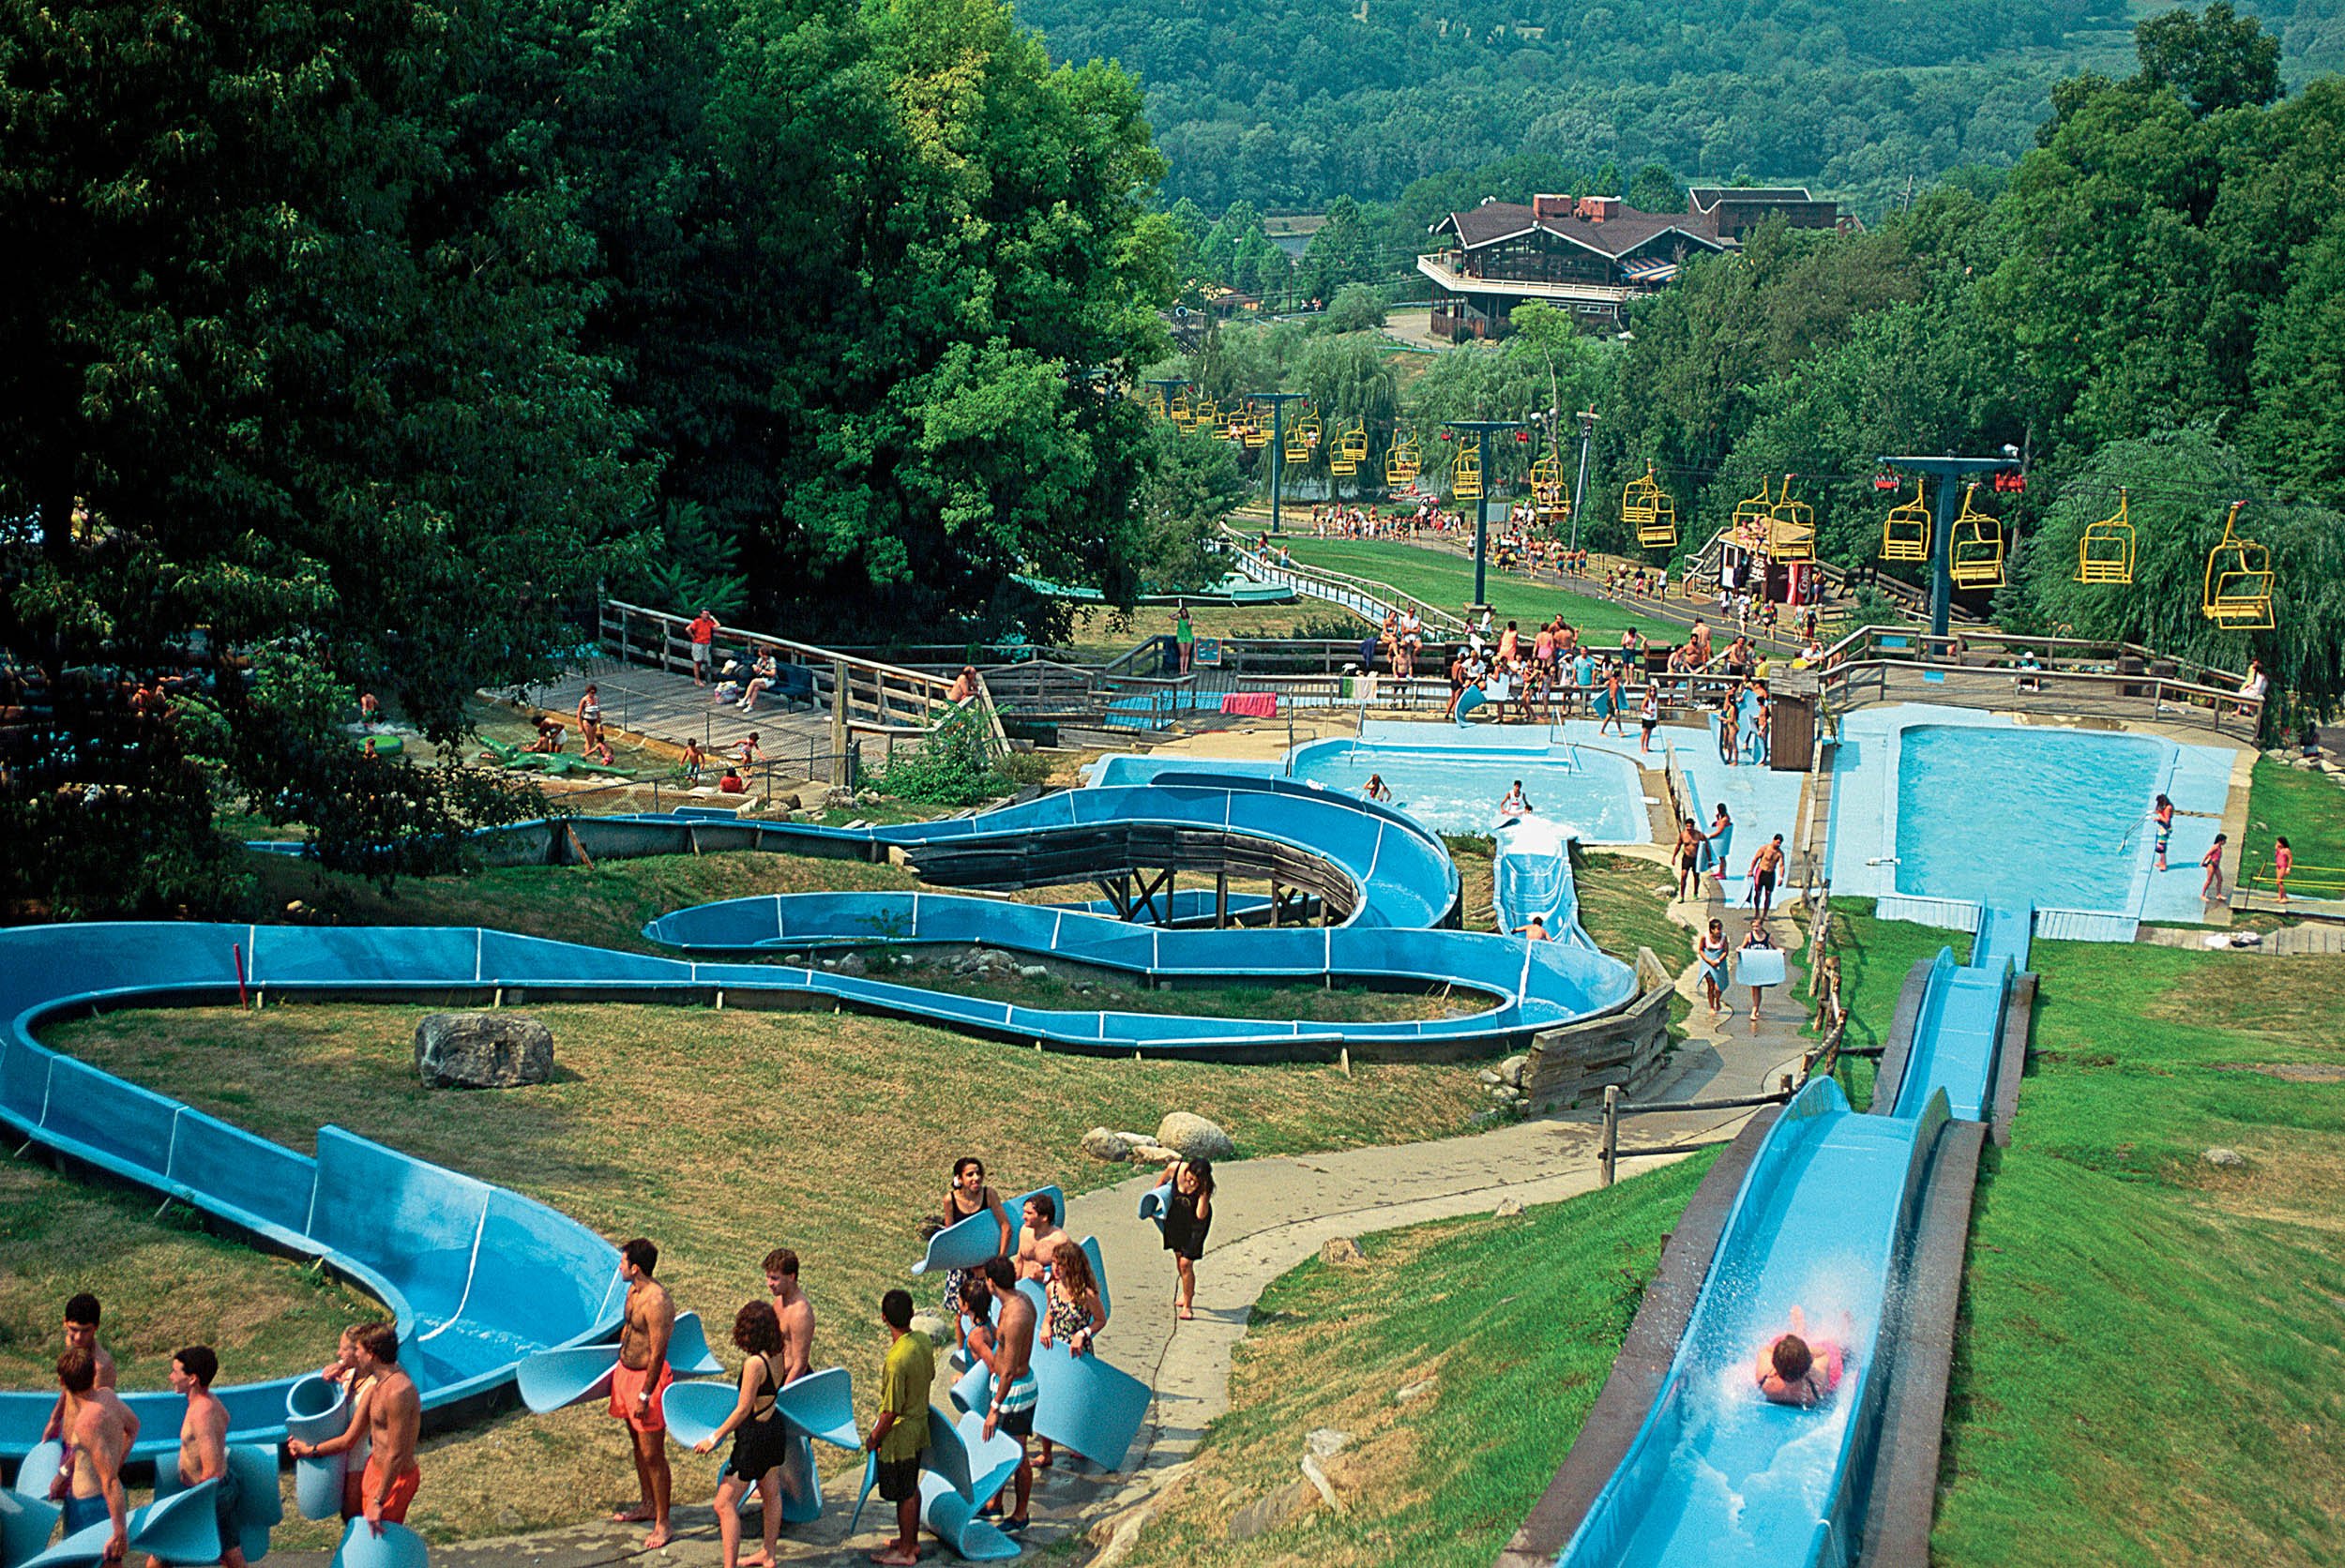 Transistor schipper geeuwen 5 Of The Craziest Stories About New Jersey's Infamous Action Park